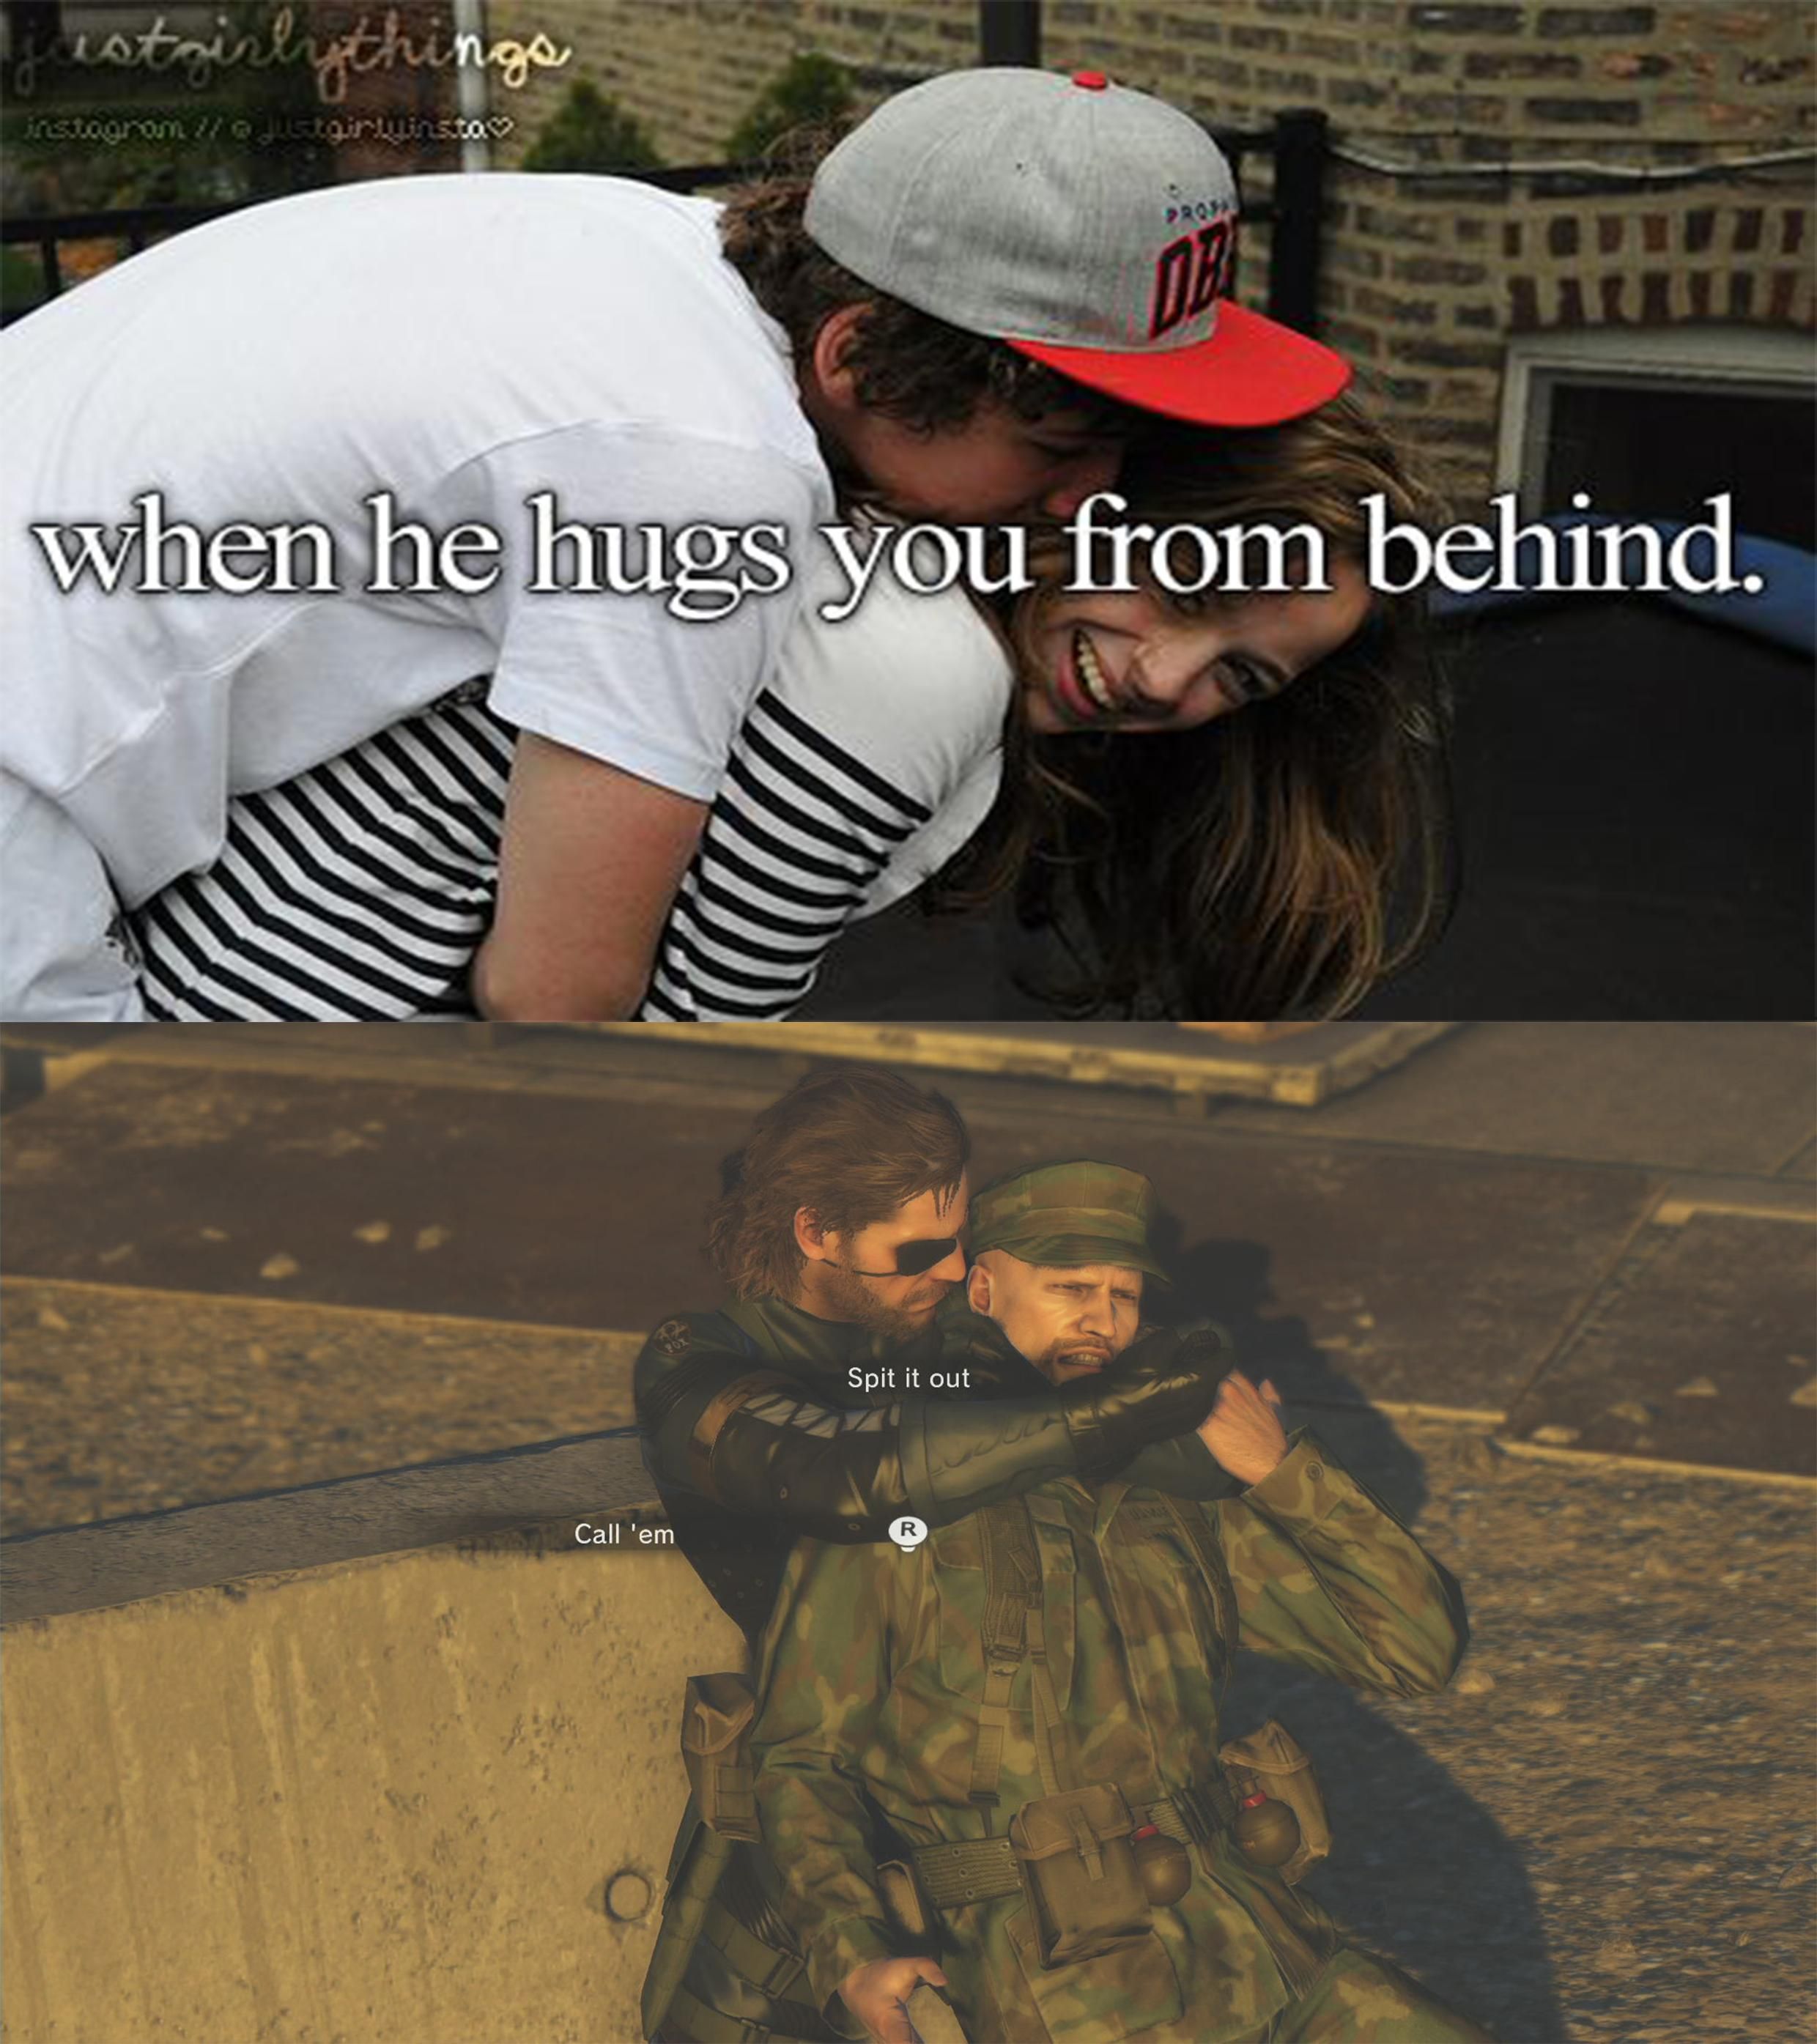 When he hugs you from behind...